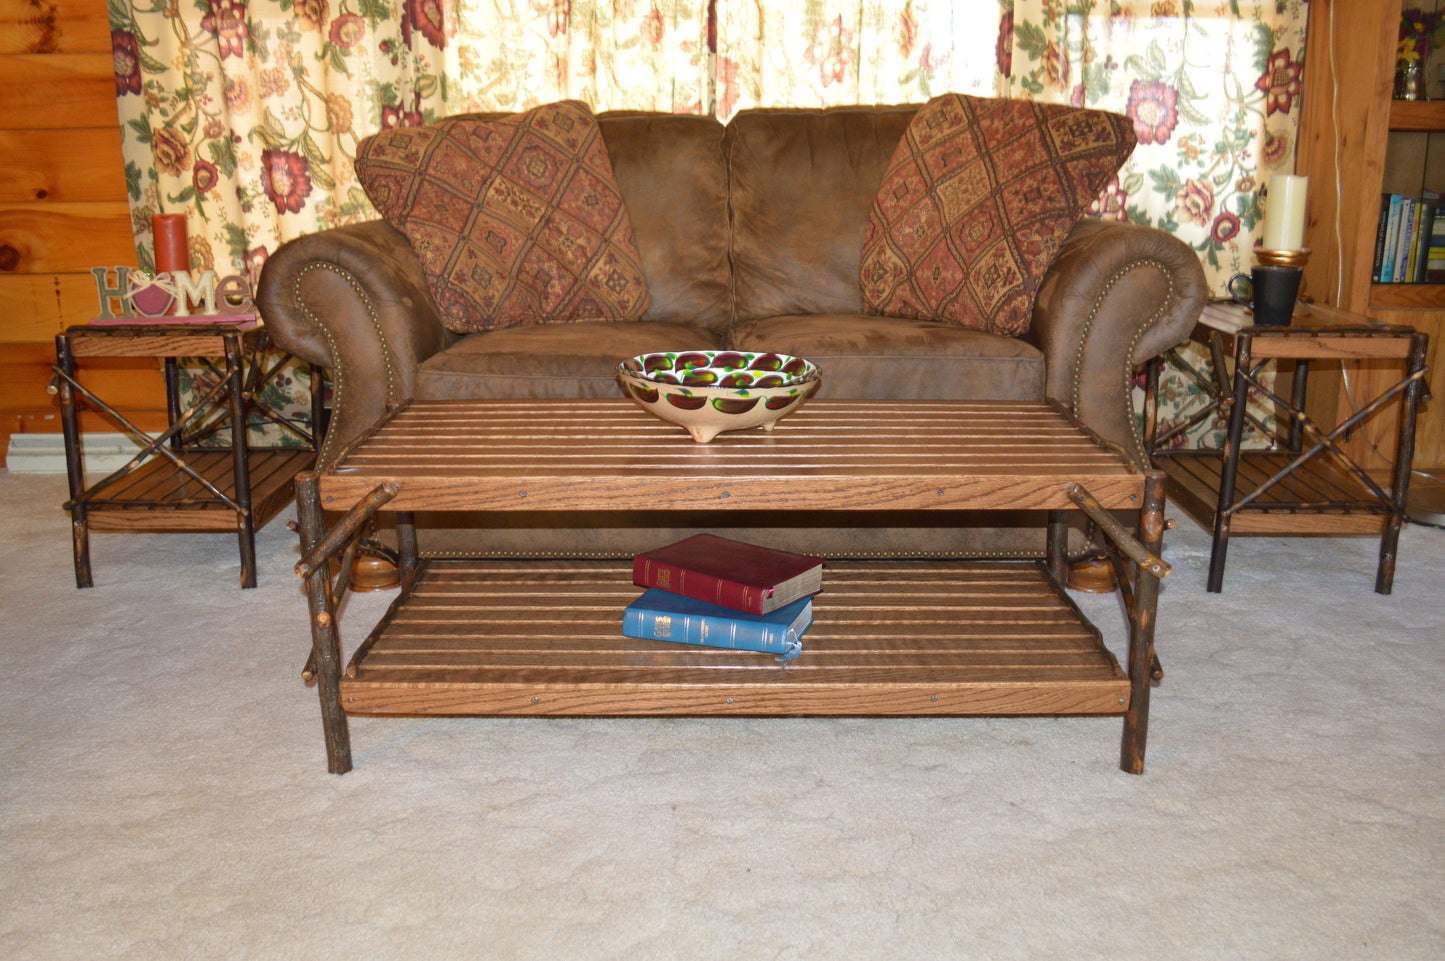 A&L Furniture Co. Amish Hickory Coffee Table with Shelf - LEAD TIME TO SHIP 10 BUSINESS DAYS